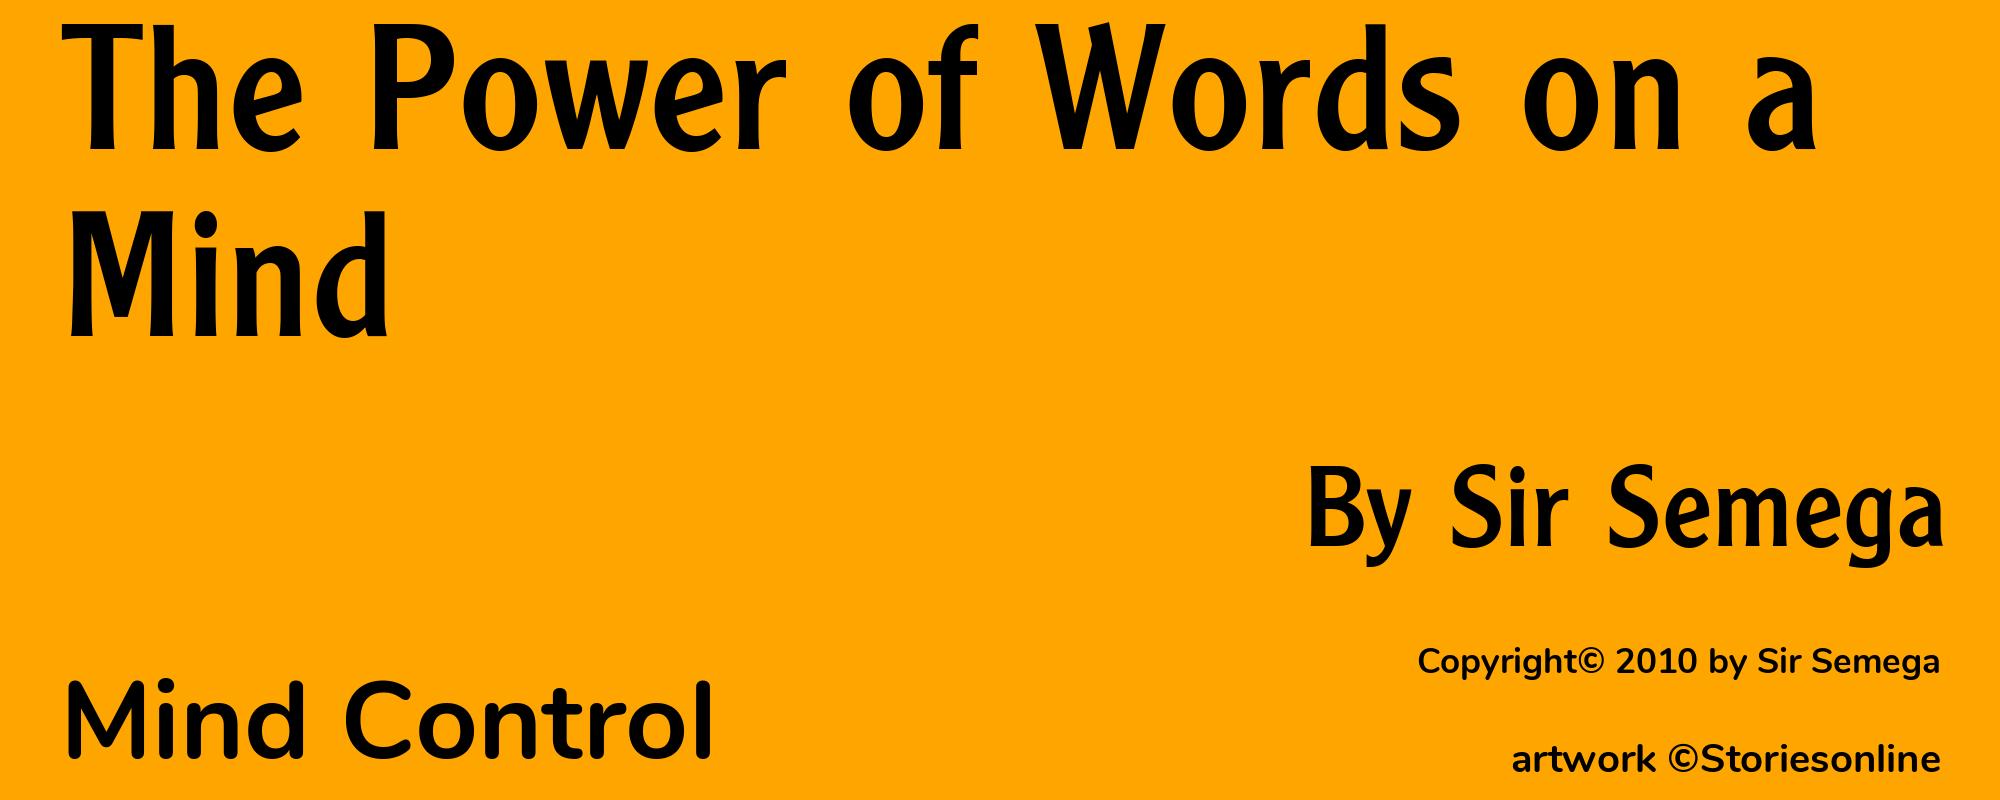 The Power of Words on a Mind - Cover